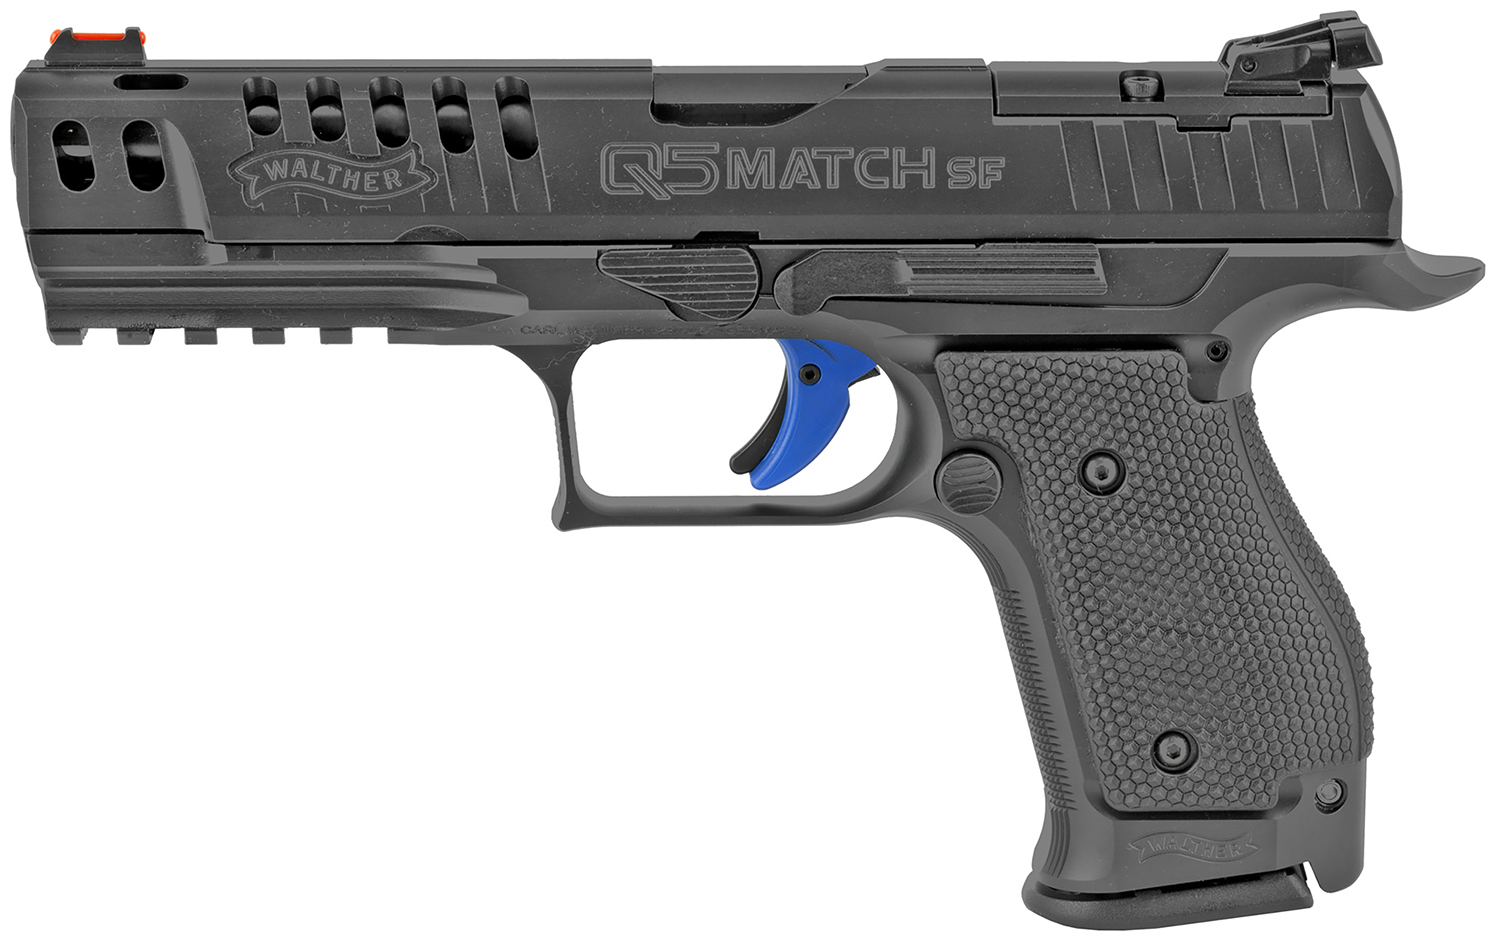 WALTHER 2851075 PPQ/Q5  9MM    MATCH ST FRME      10RD